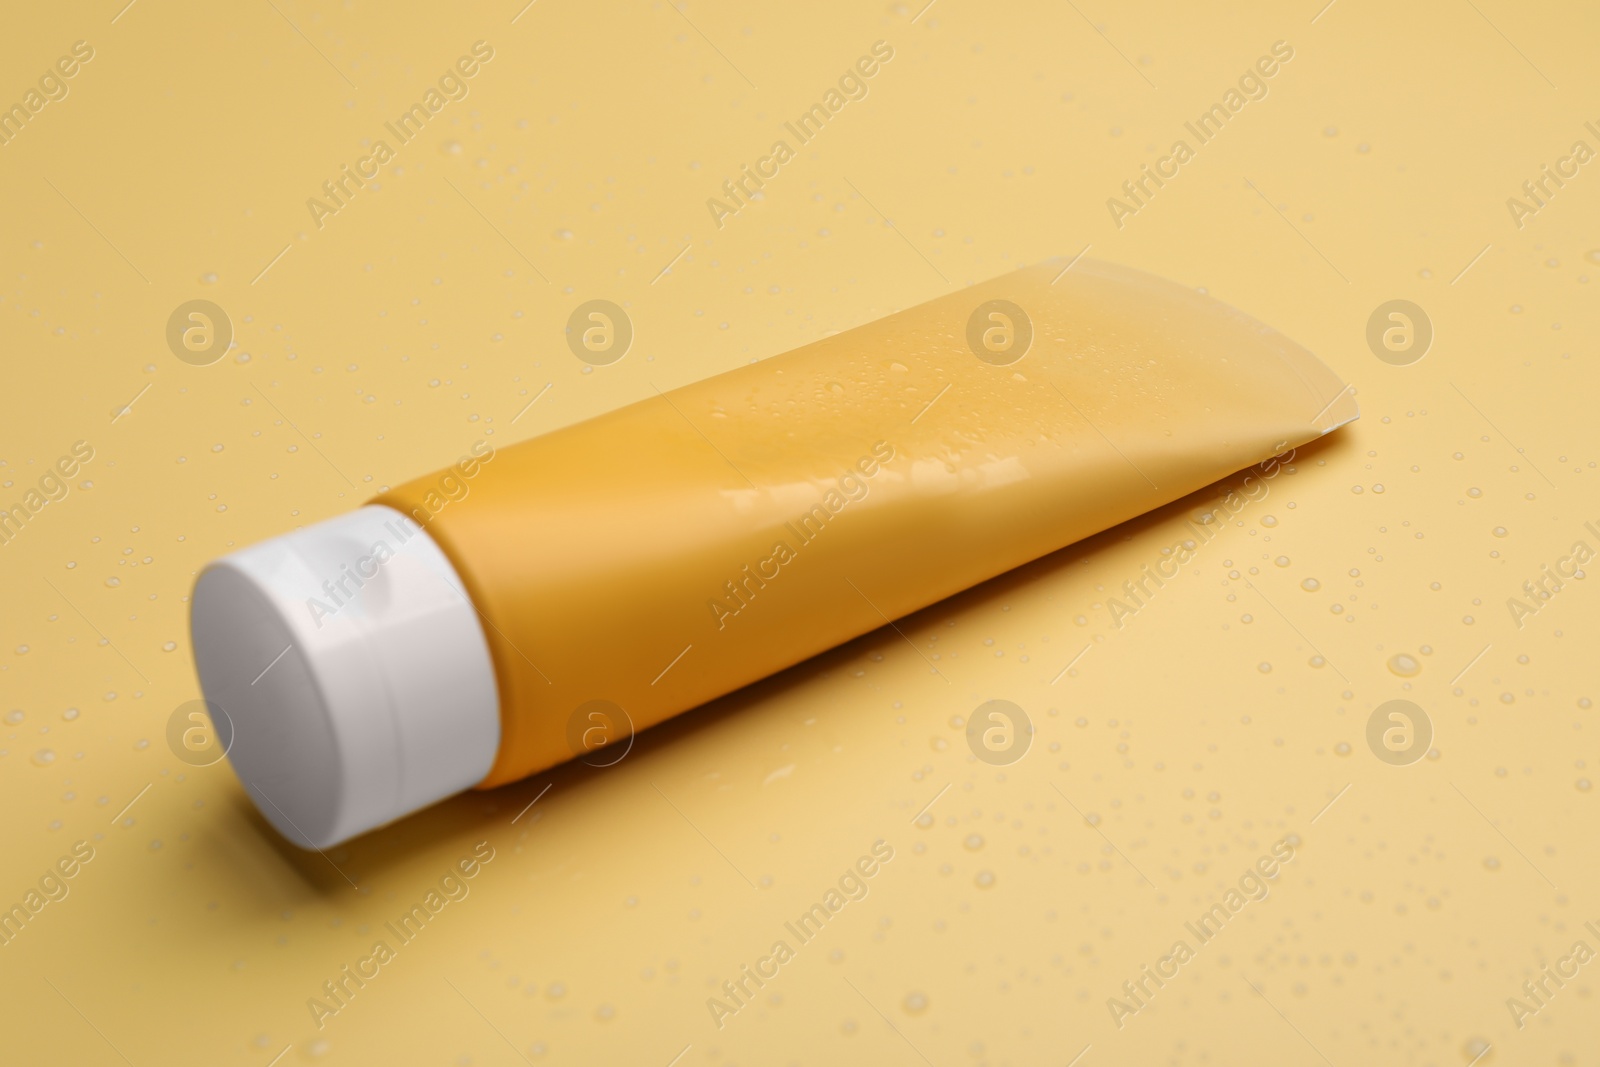 Photo of Wet tube of face cleansing product on pale orange background